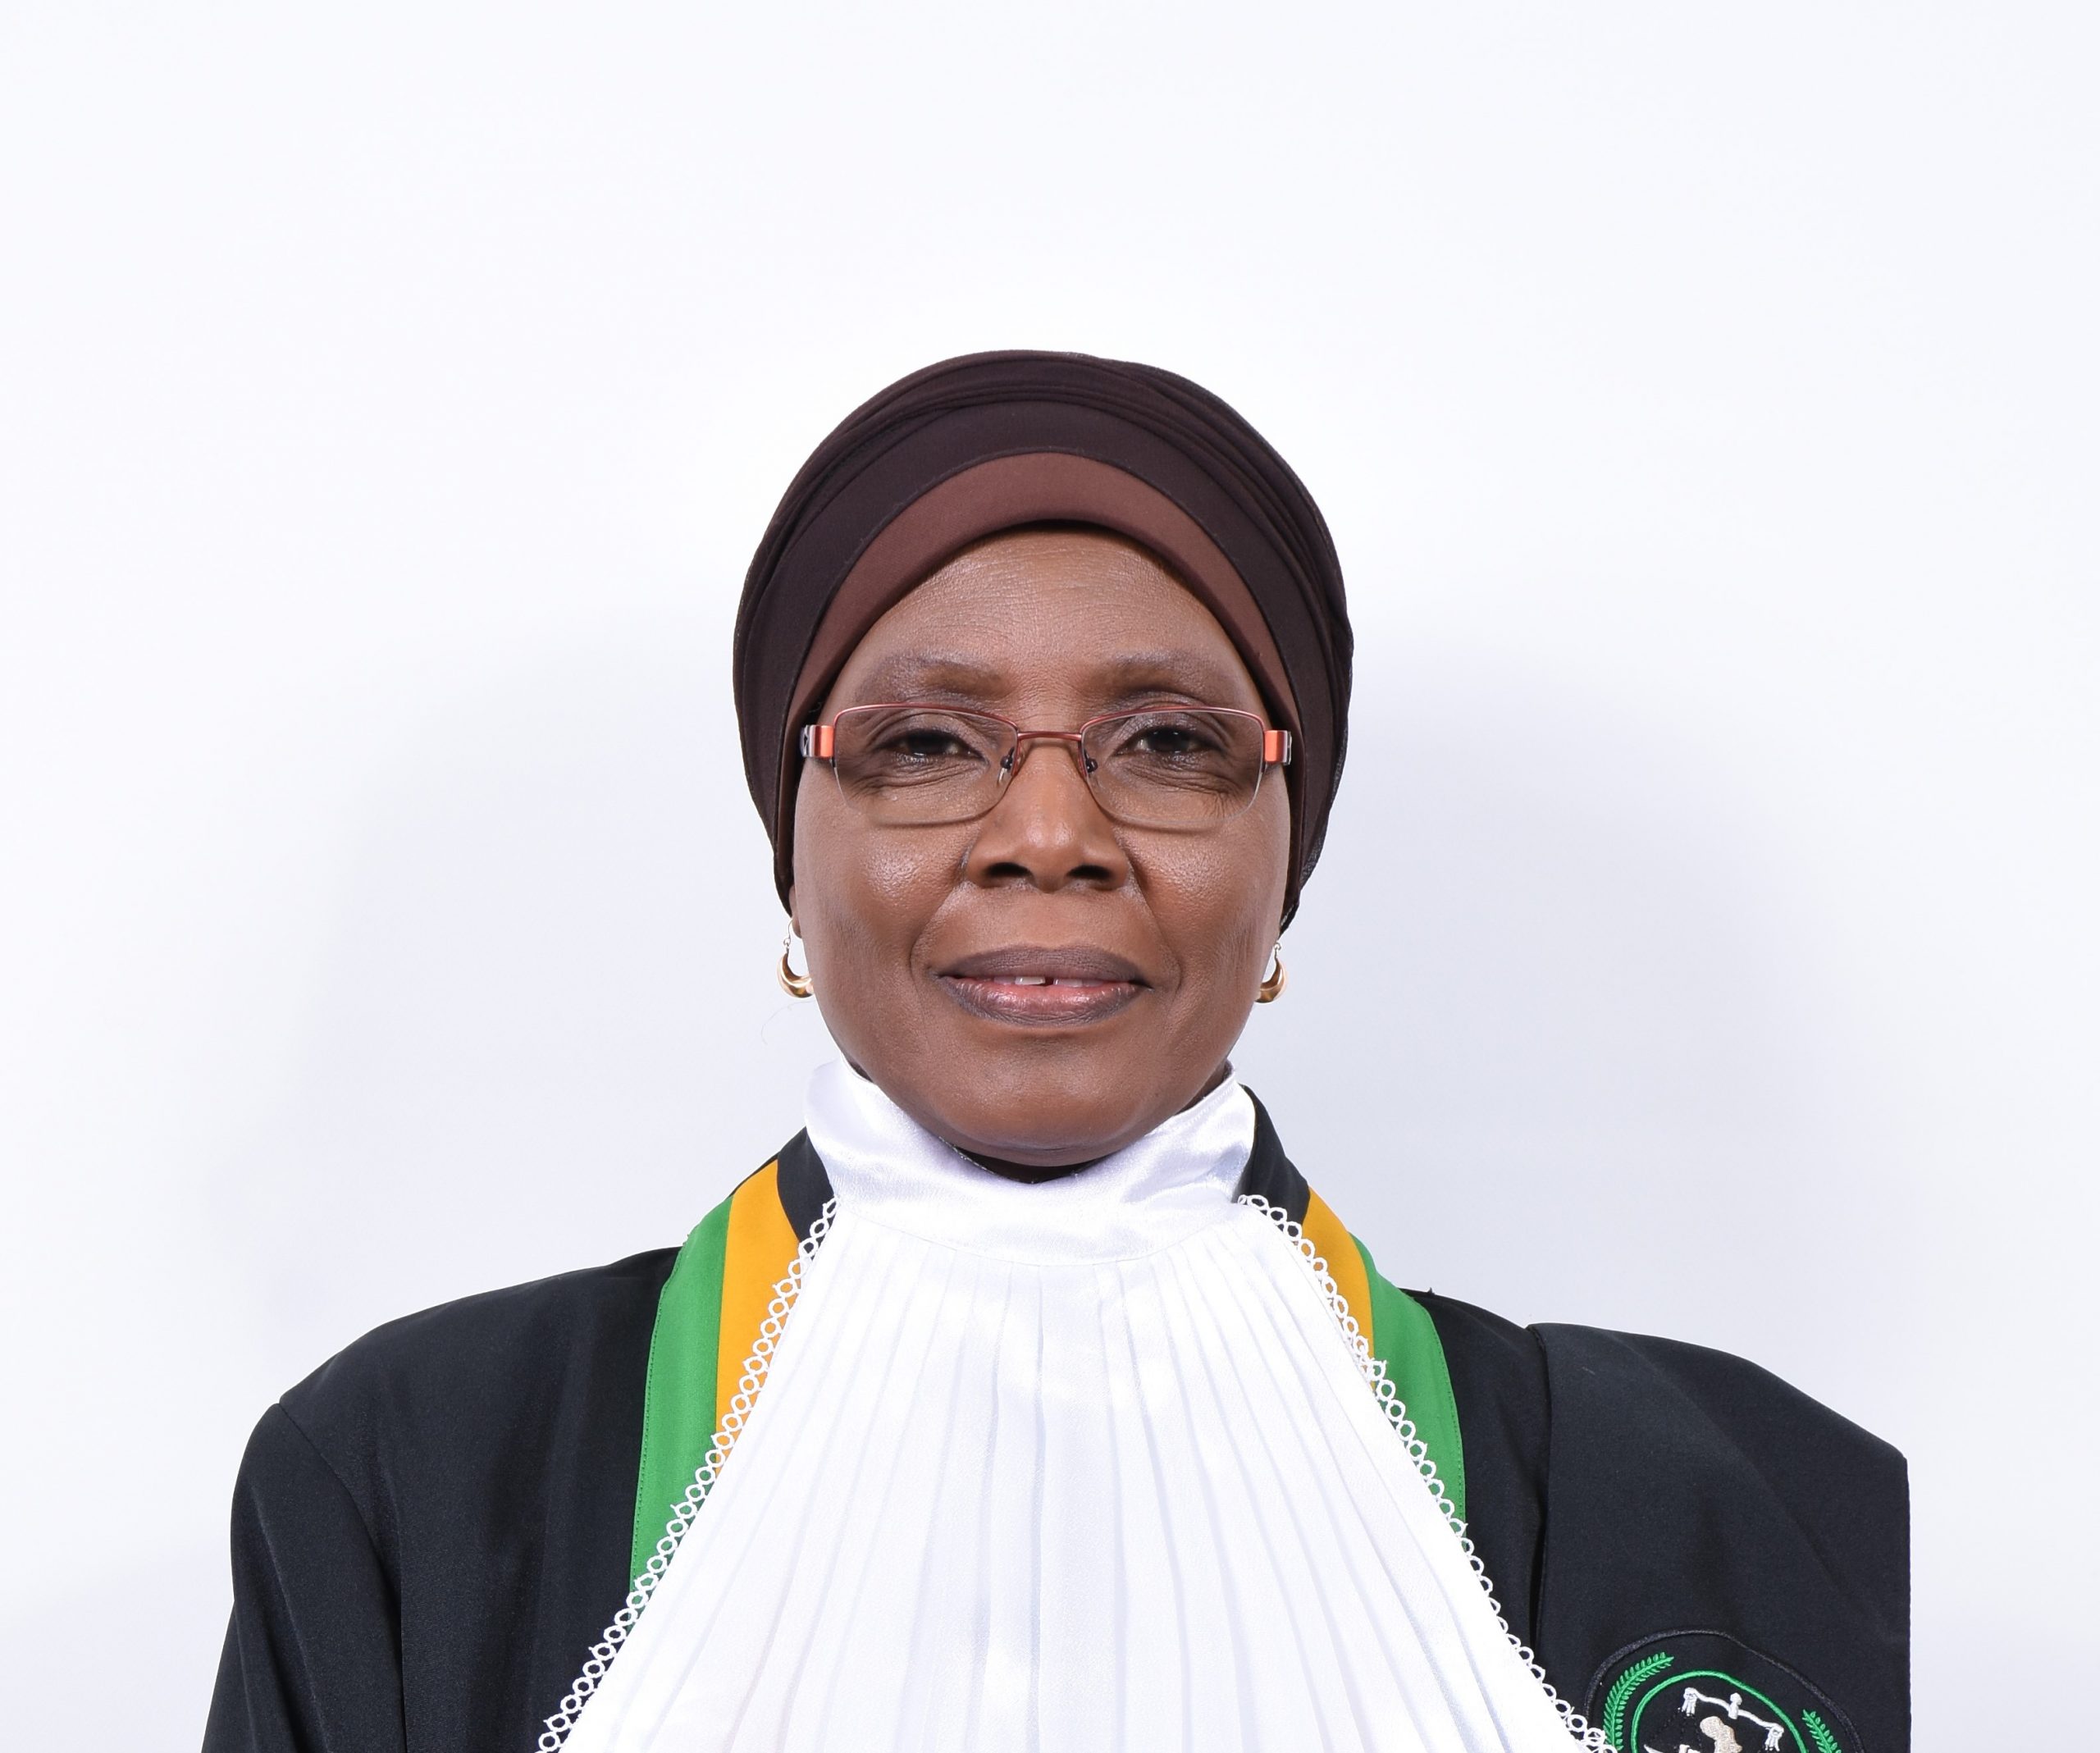 2022 NEW YEAR MESSAGE OF HER EXCELLENCY IMANI D. ABOUD, PRESIDENT OF THE AFRICAN COURT ON HUMAN AND PEOPLES’ RIGHTS